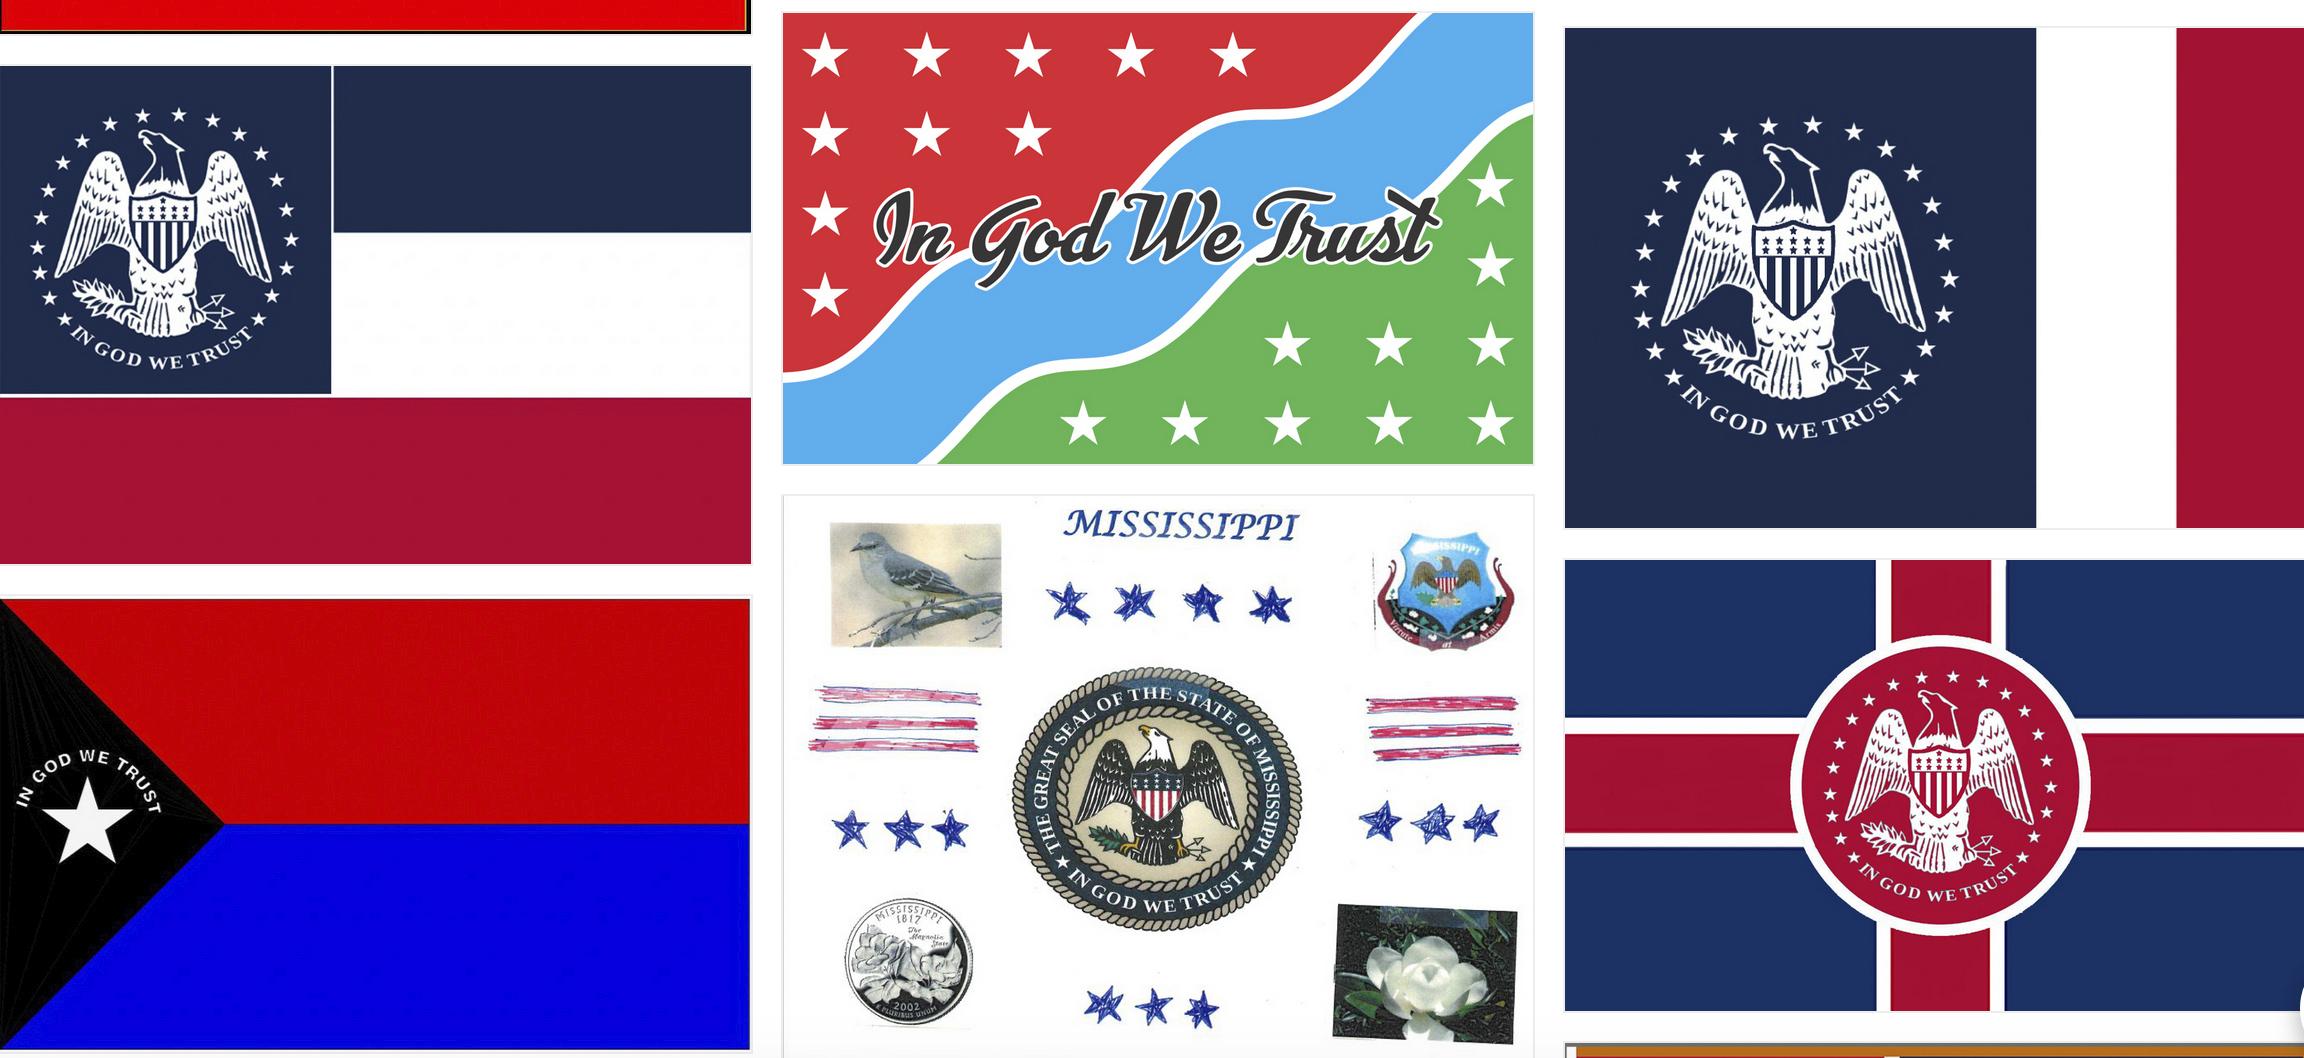 Magnolias, stars, a Gulf Coast lighthouse, a teddy bear, and even Kermit the Frog appear on some of the over 1,800 proposals submitted by the general public for a new Mississippi flag